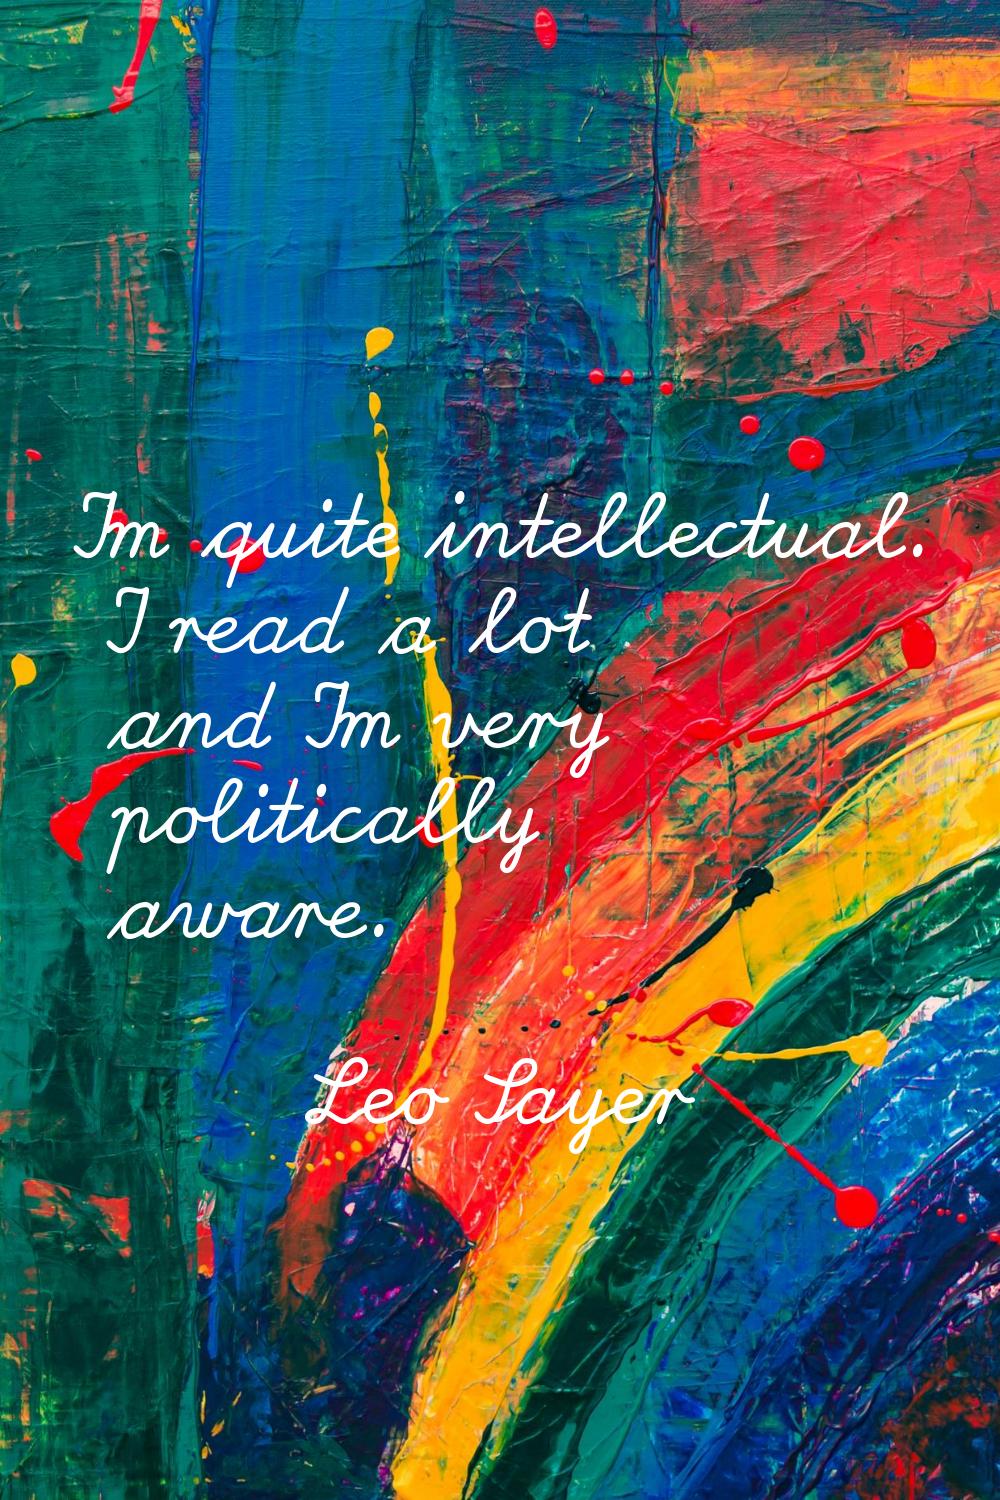 I'm quite intellectual. I read a lot and I'm very politically aware.